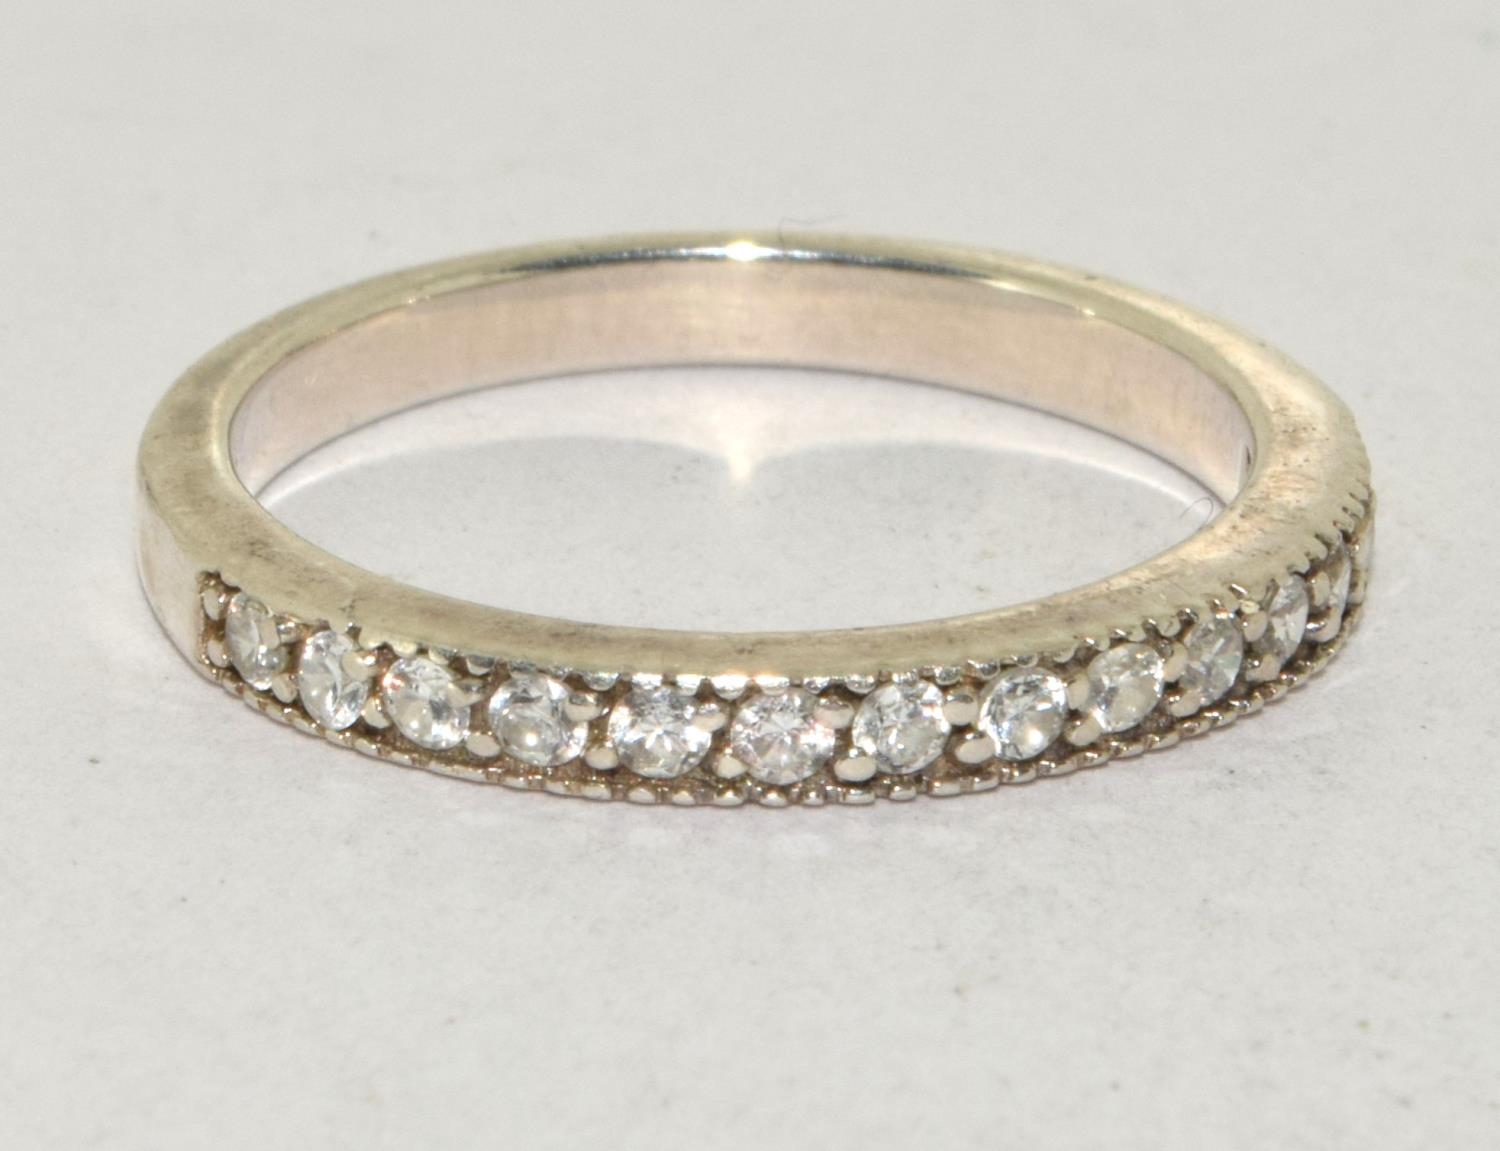 A 925 silver and CZ half eternity band. Size Q